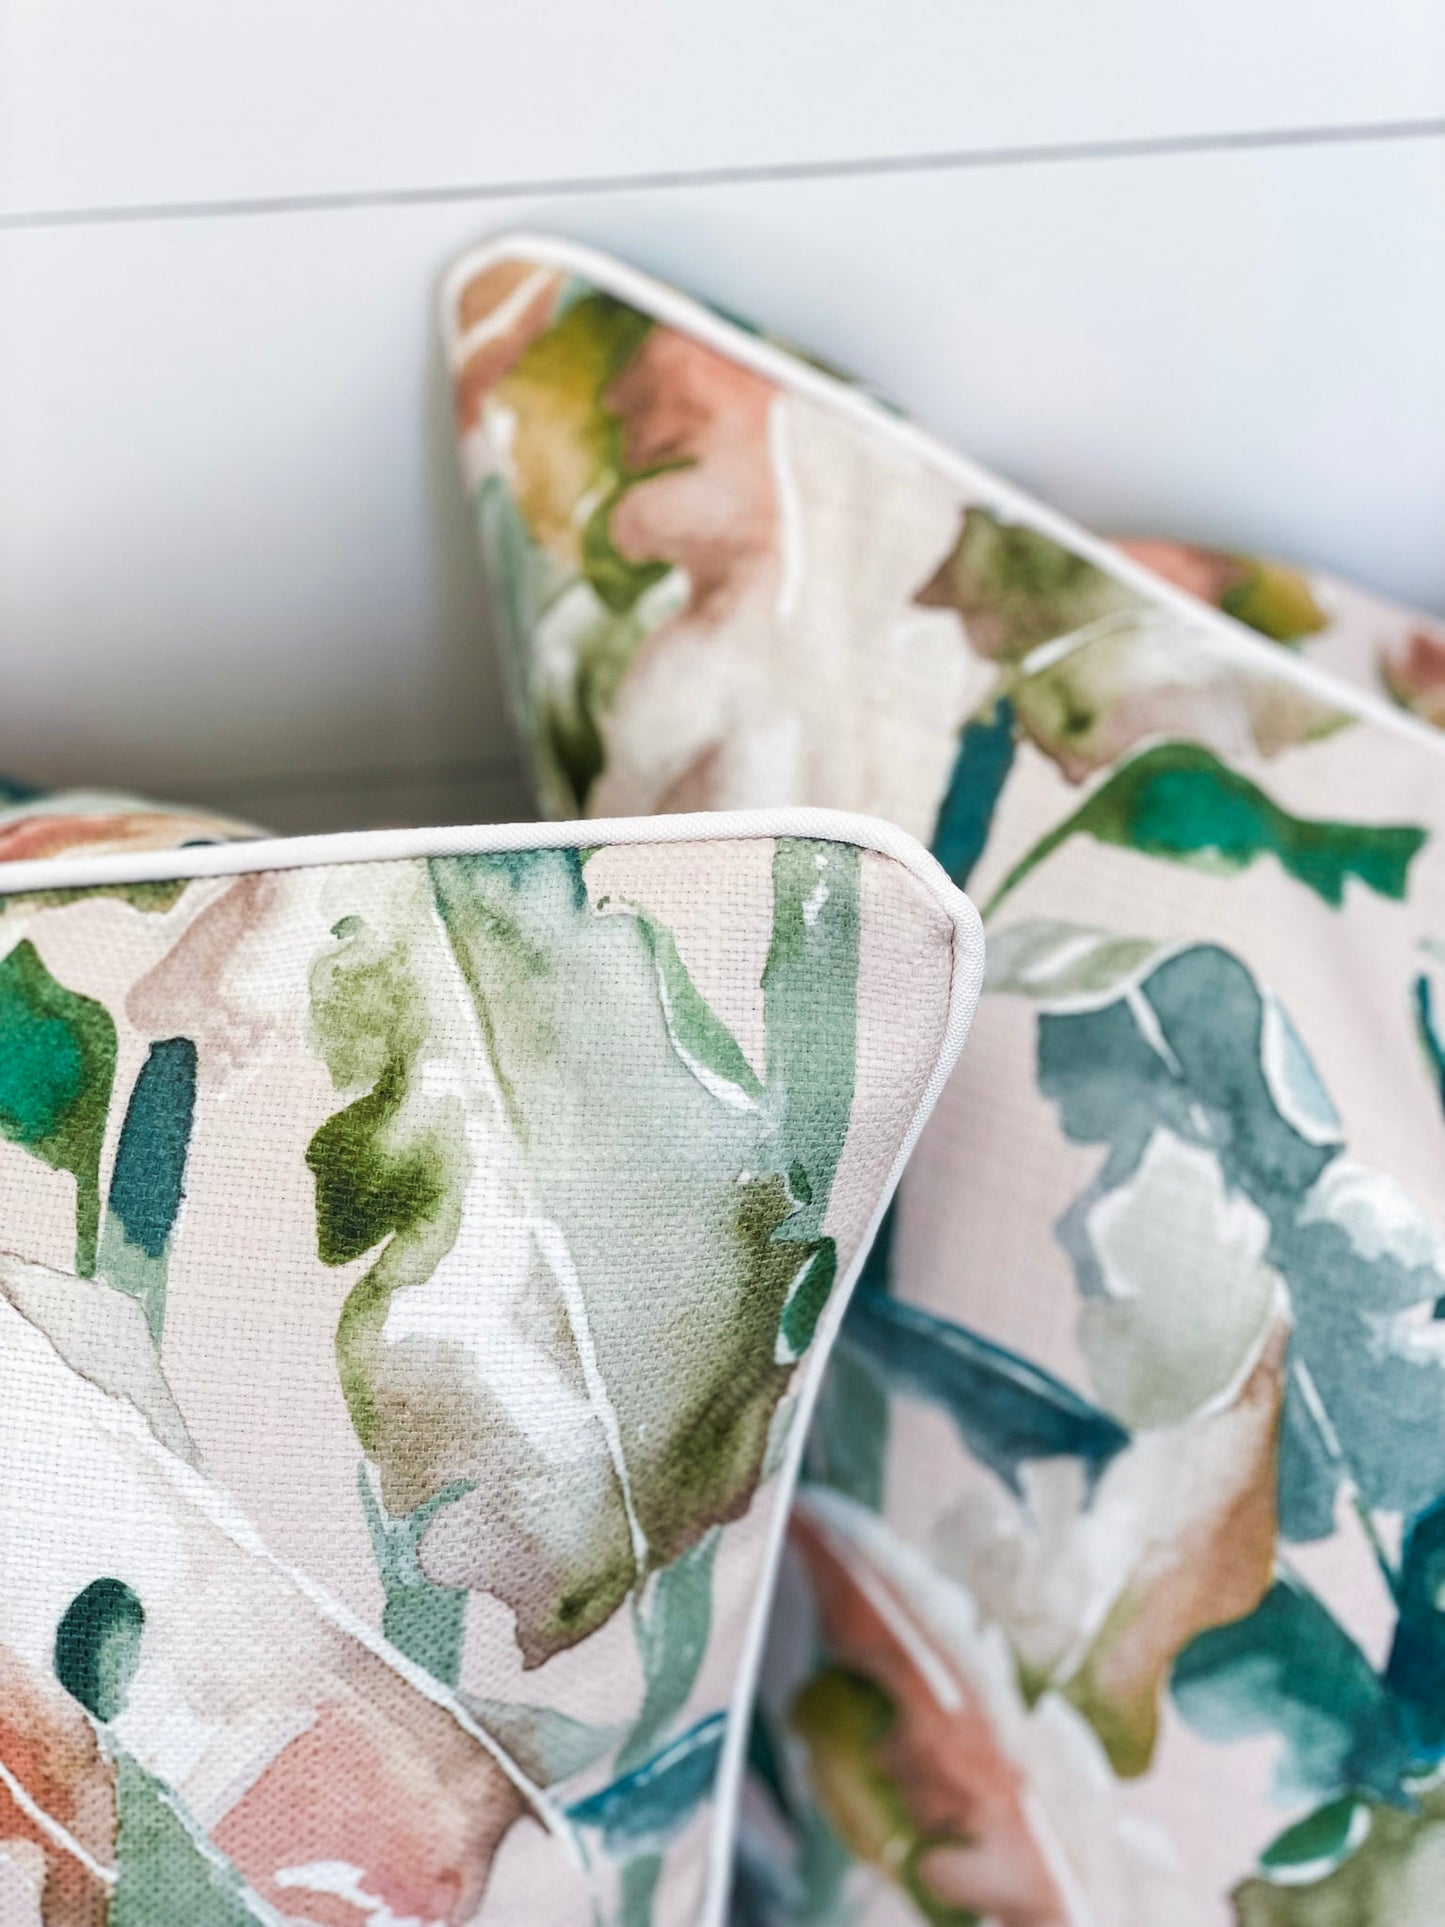 Outdoor Cushion Cover - Natural Jungle